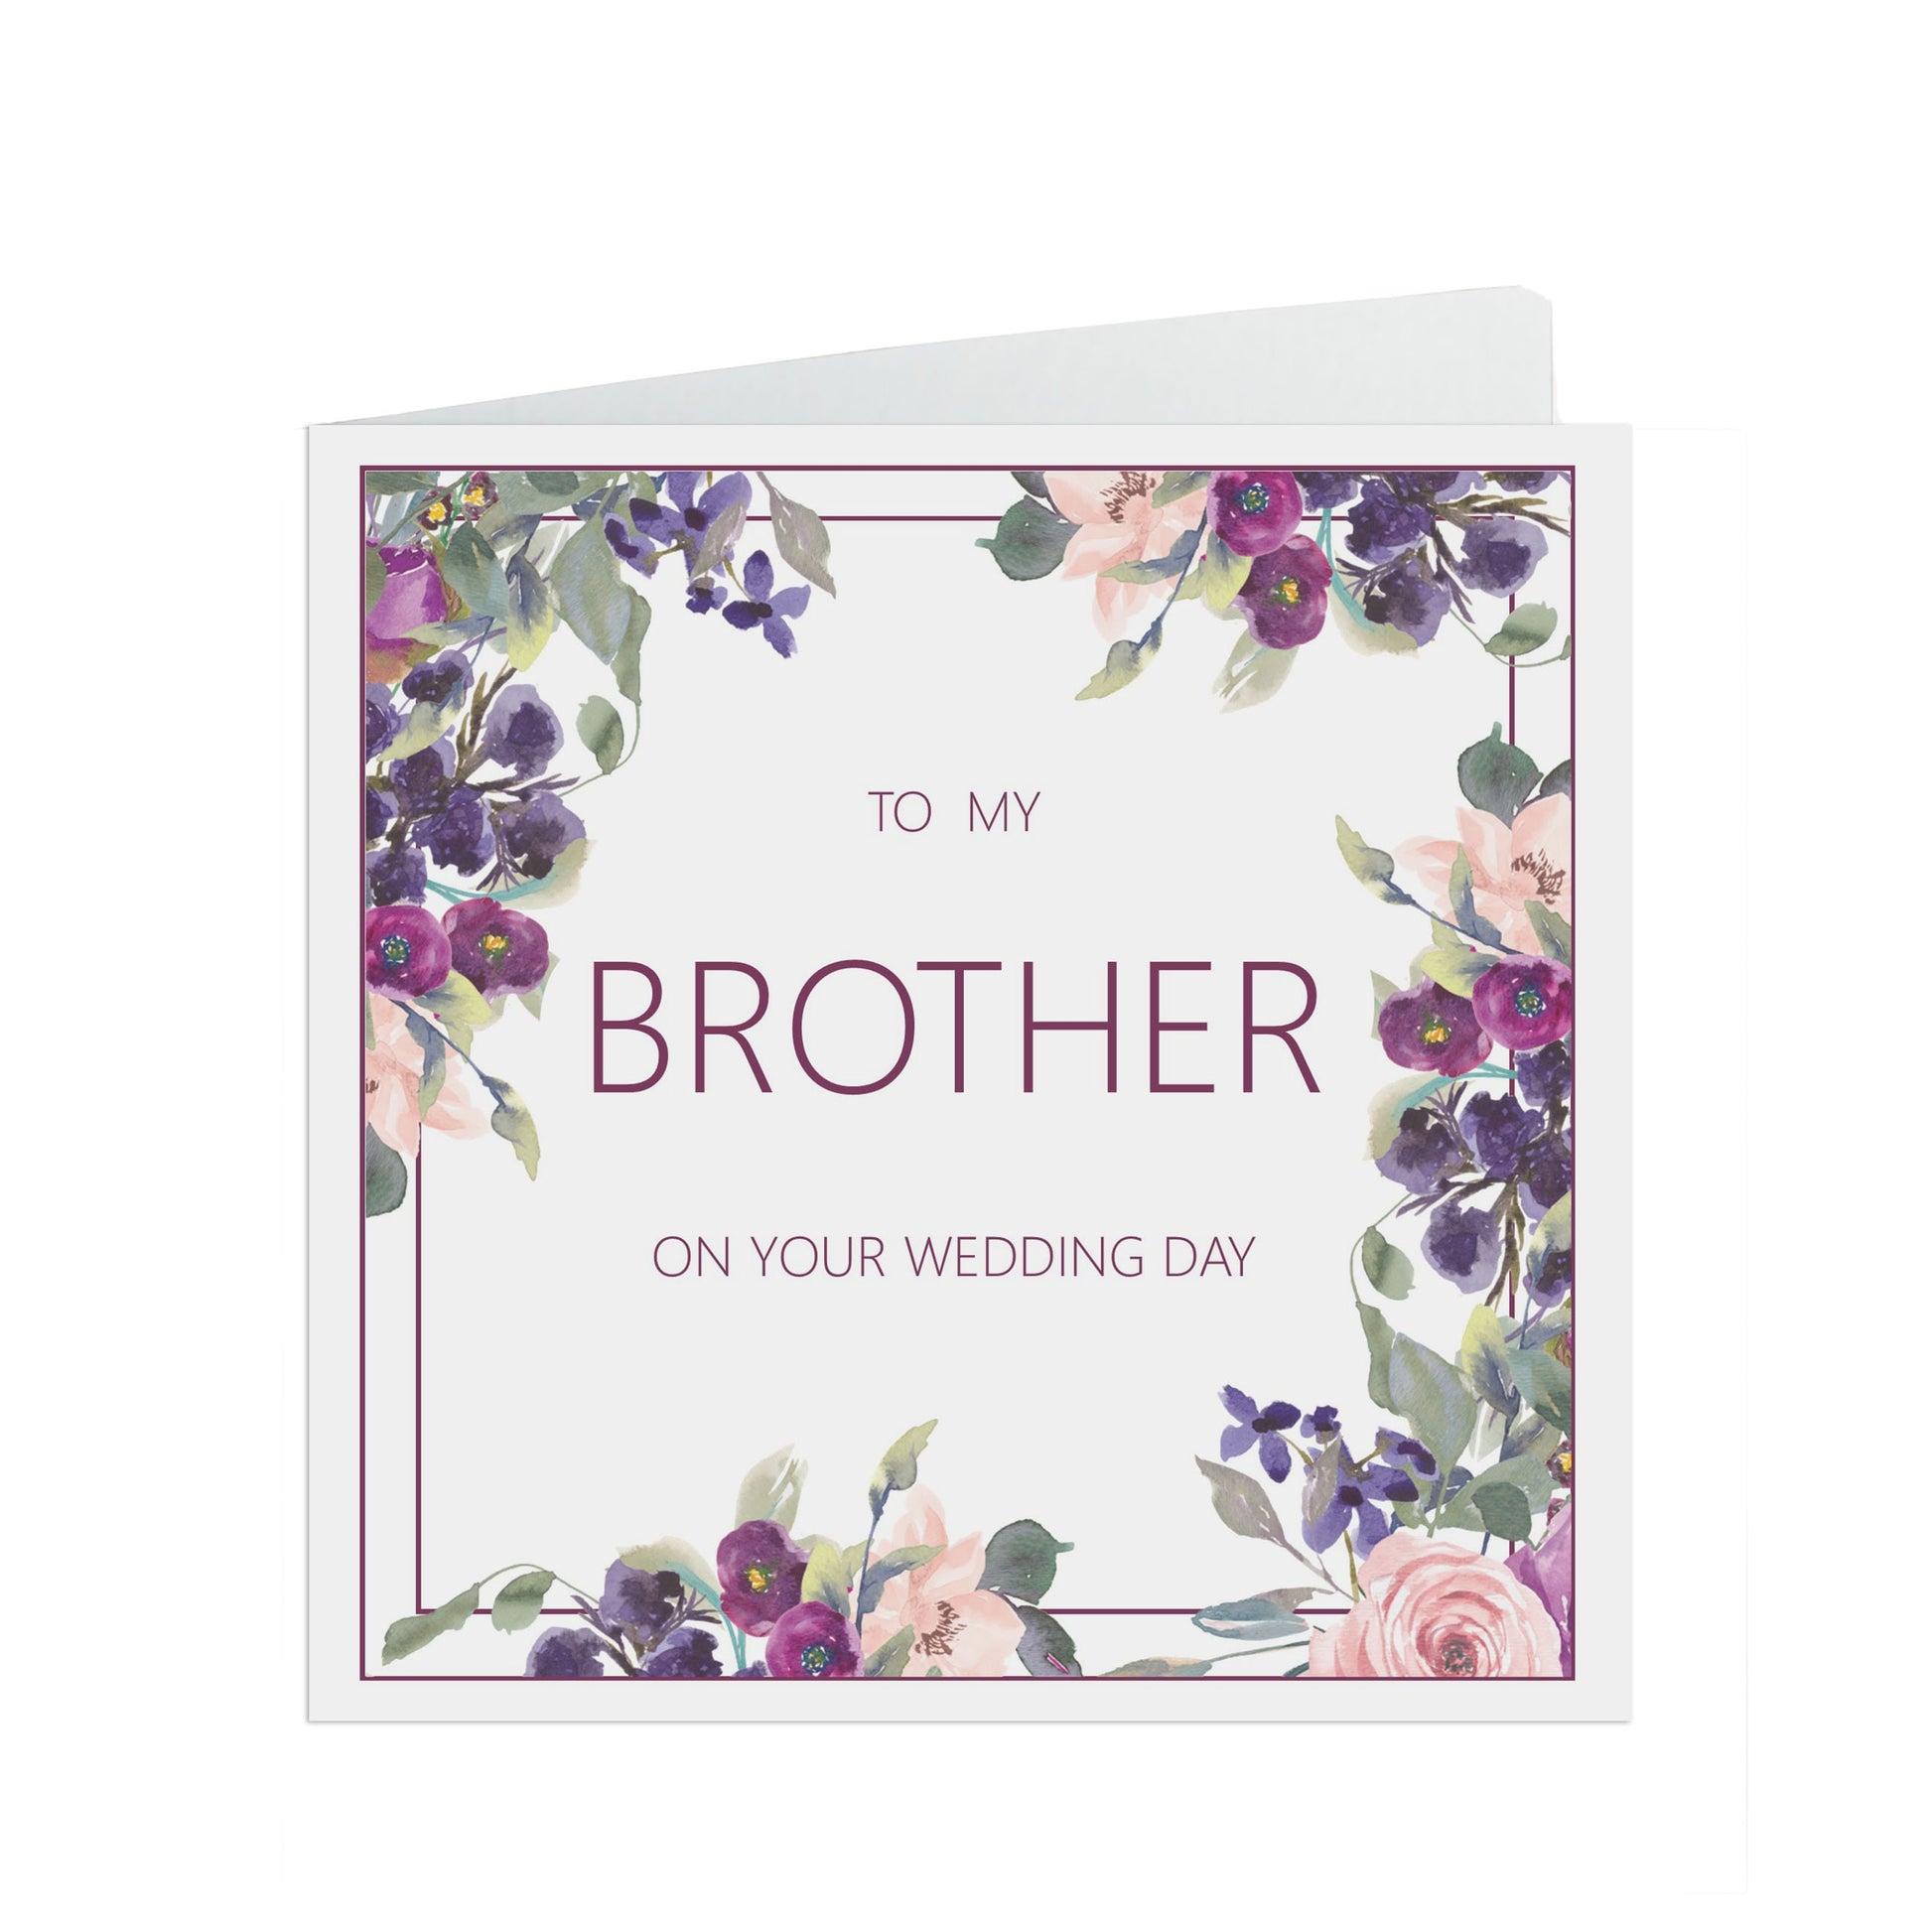 Brother Wedding Day Card, Purple Floral 6x6 Inches With A Kraft Envelope